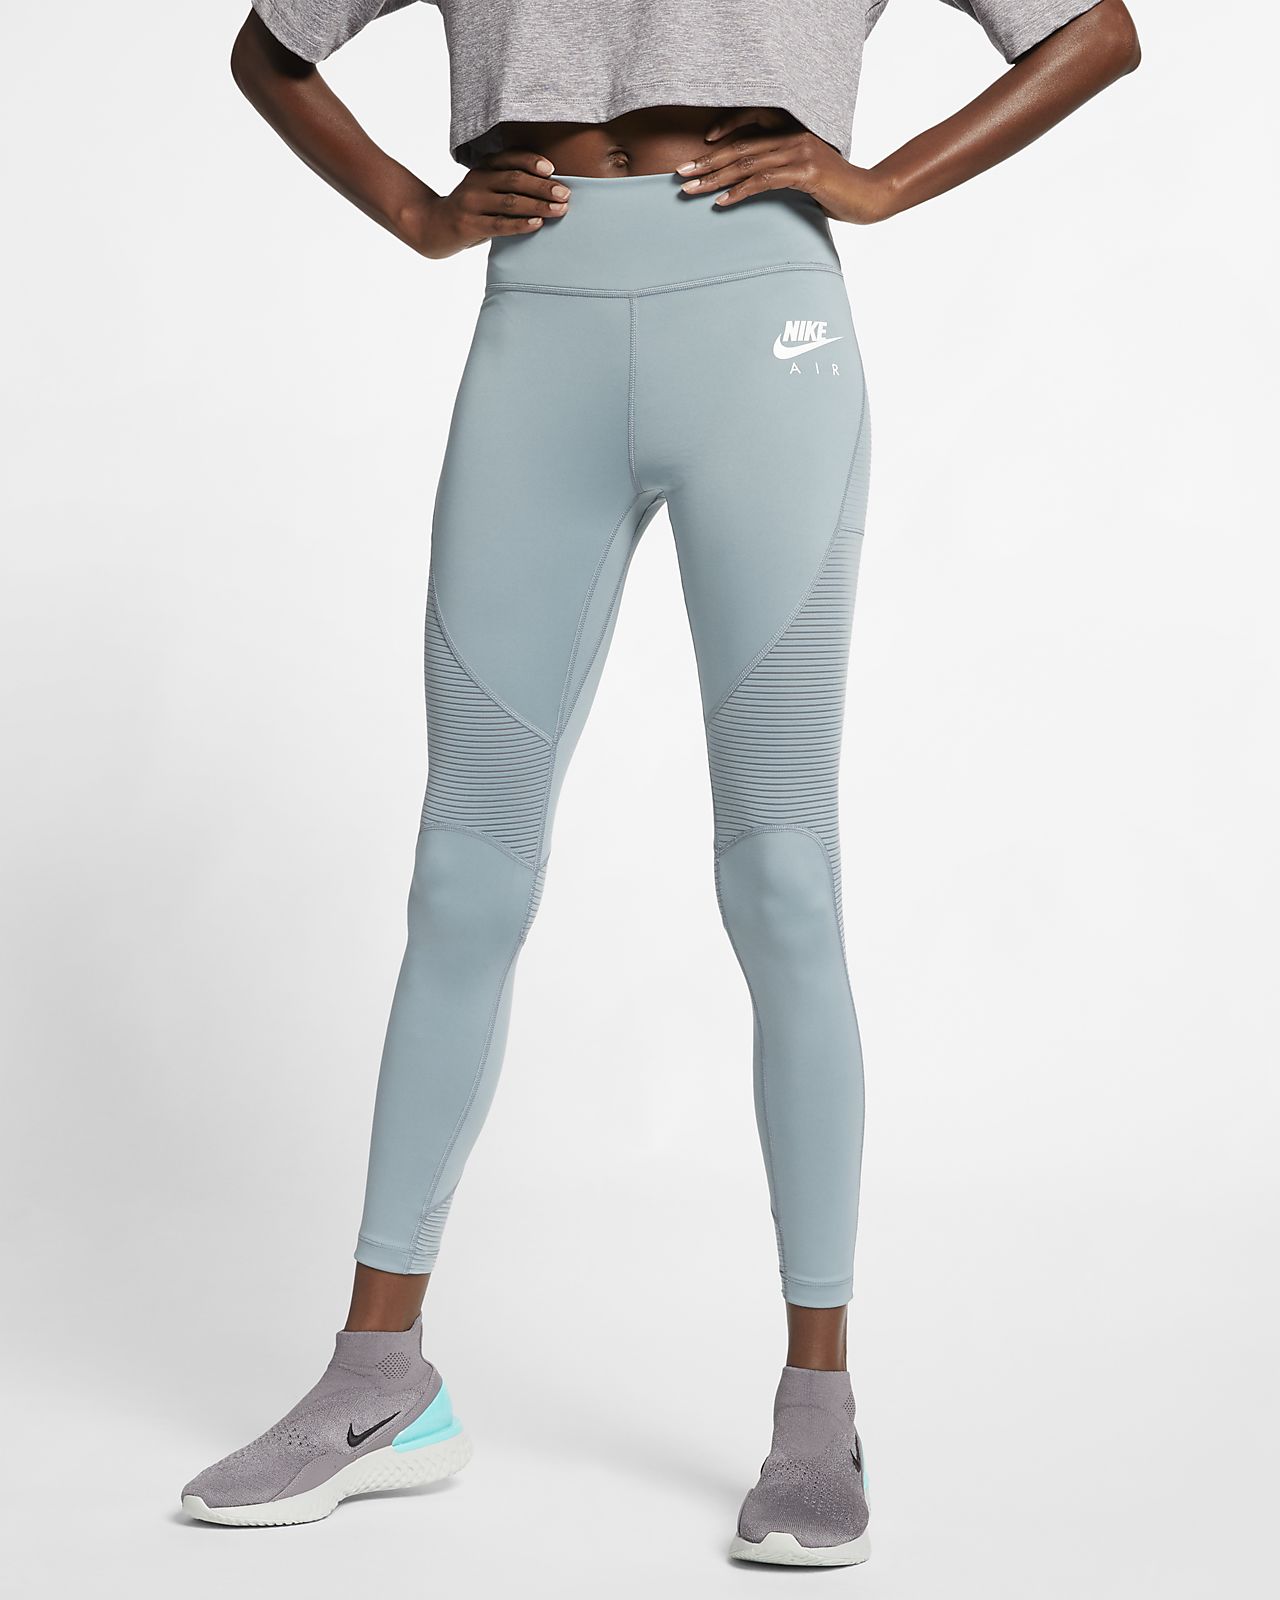 nike air running tights \u003e Up to 63% OFF 